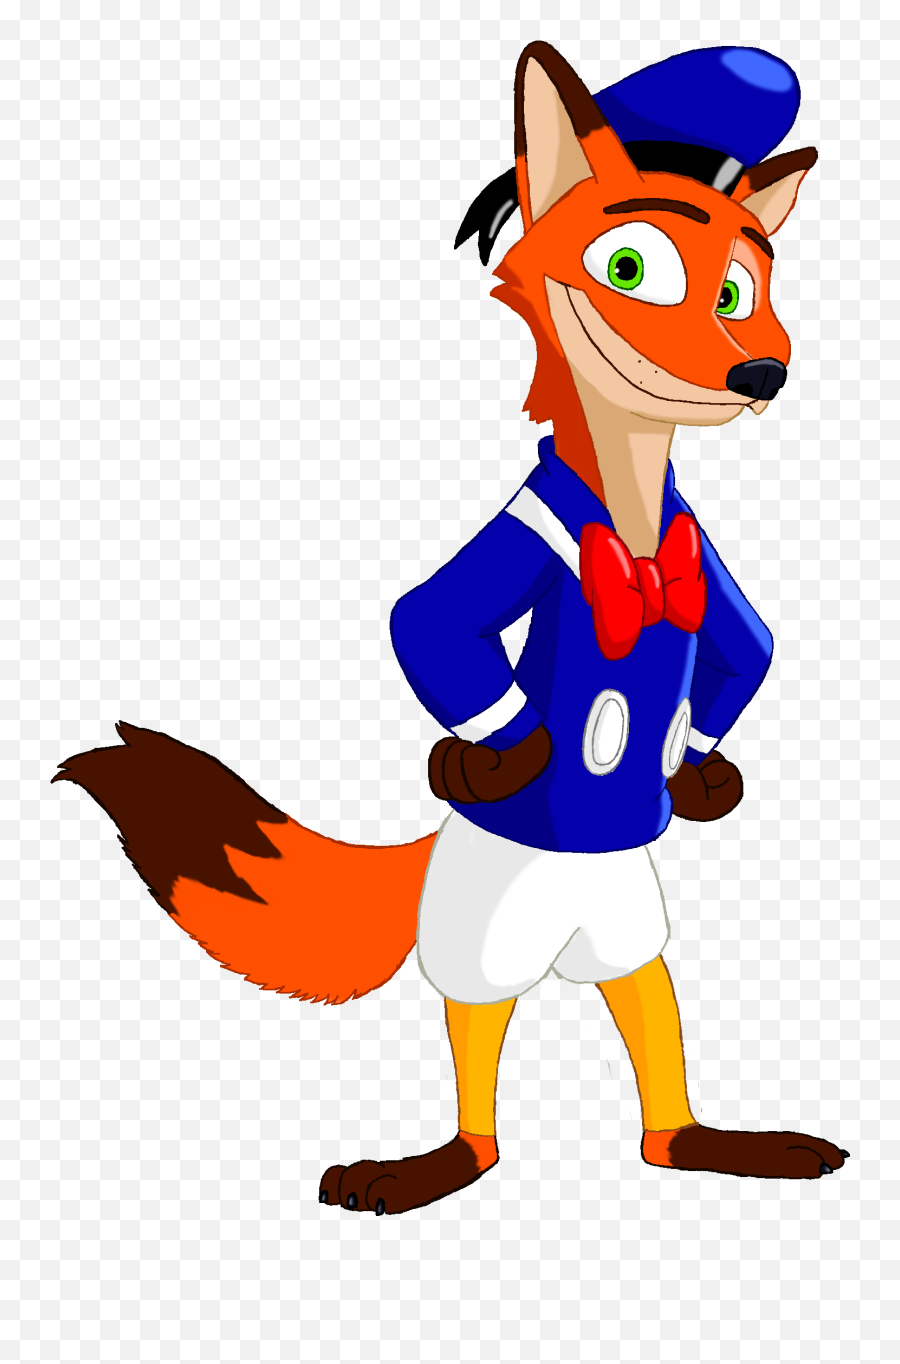 Download Nick Wilde As Donald Duck - Donald Duck Png Image Fictional Character,Nick Wilde Png